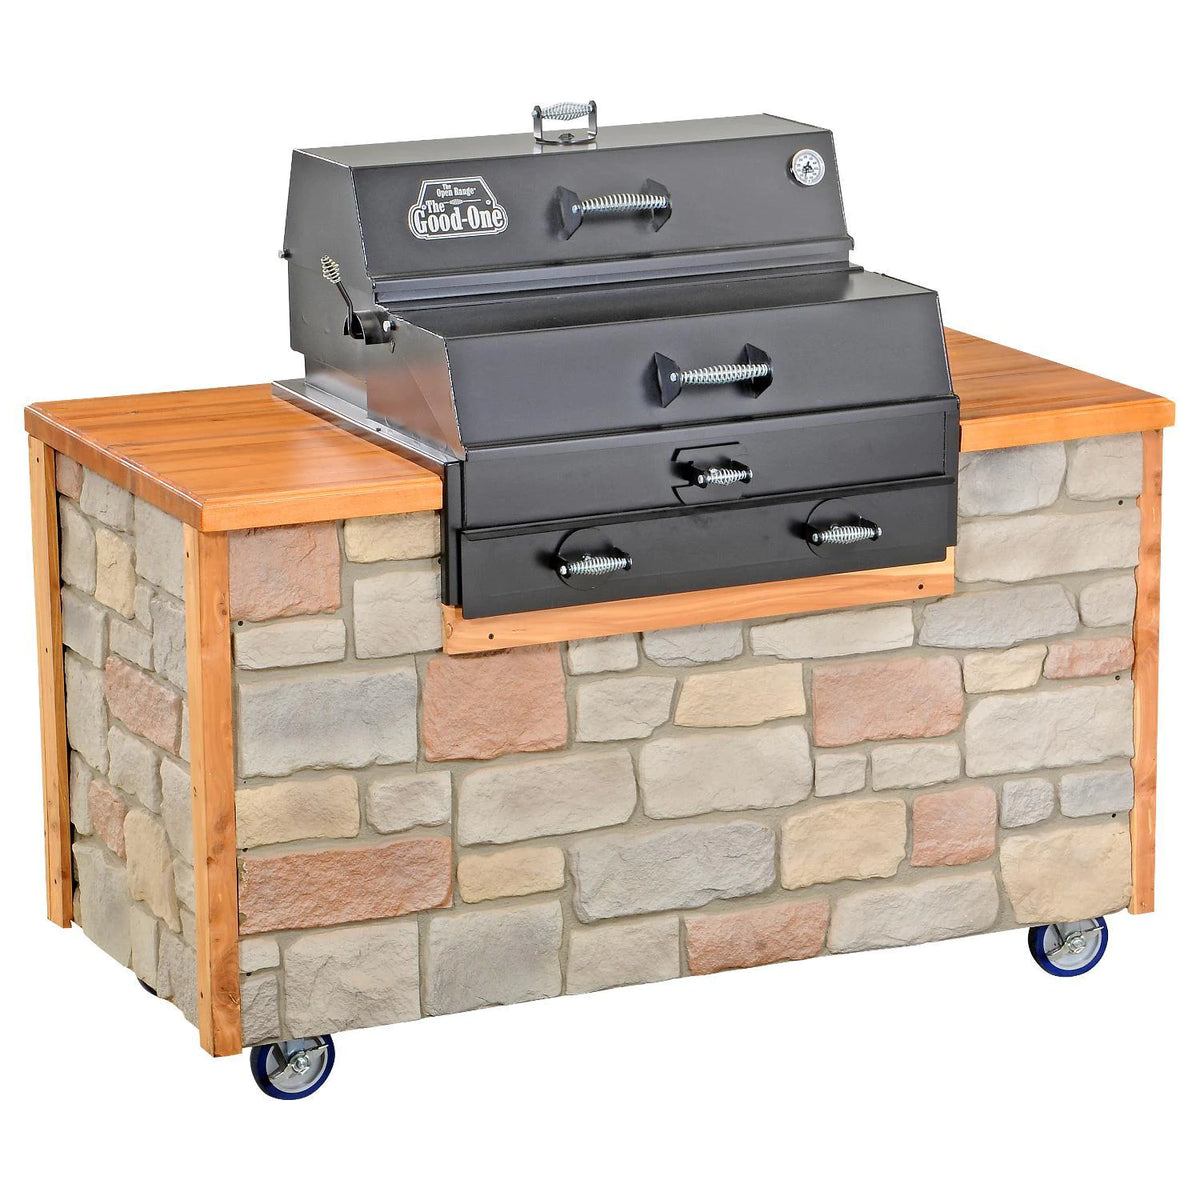 Good-One Manufacturing - 3059696 - Grill in Island - Island sold separately